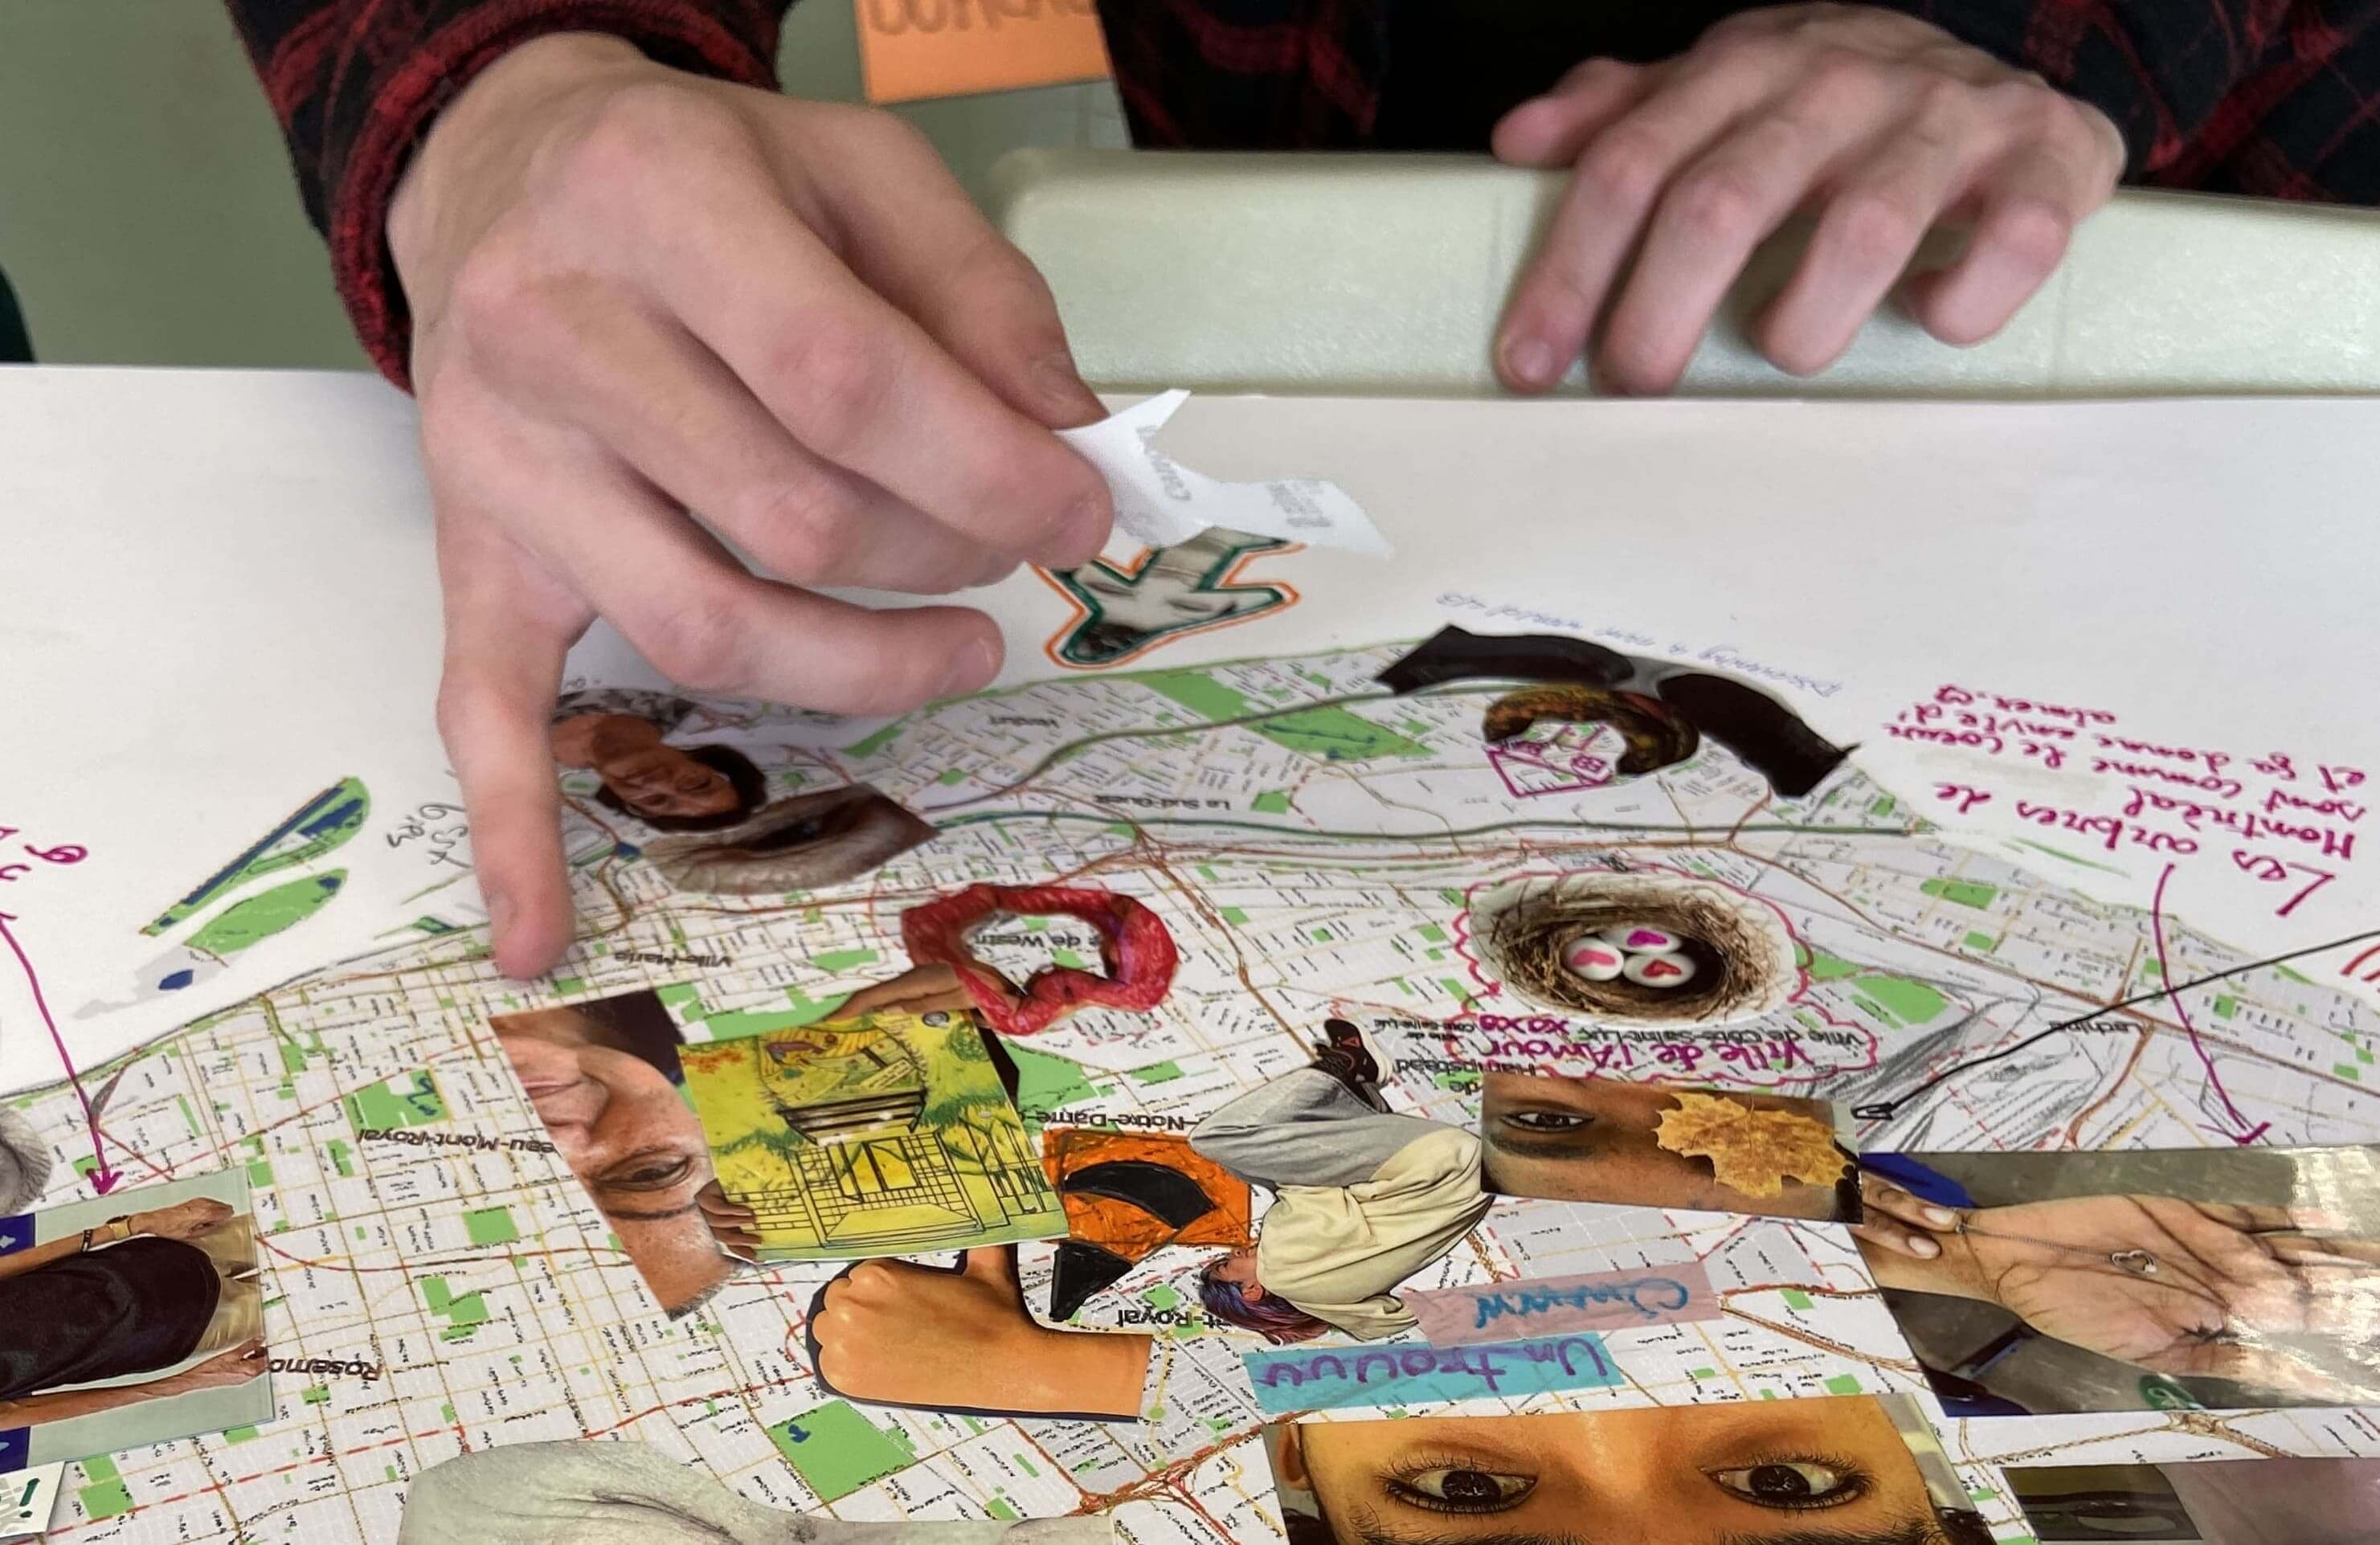 Map of Montreal decorated with cut-out photos and messages